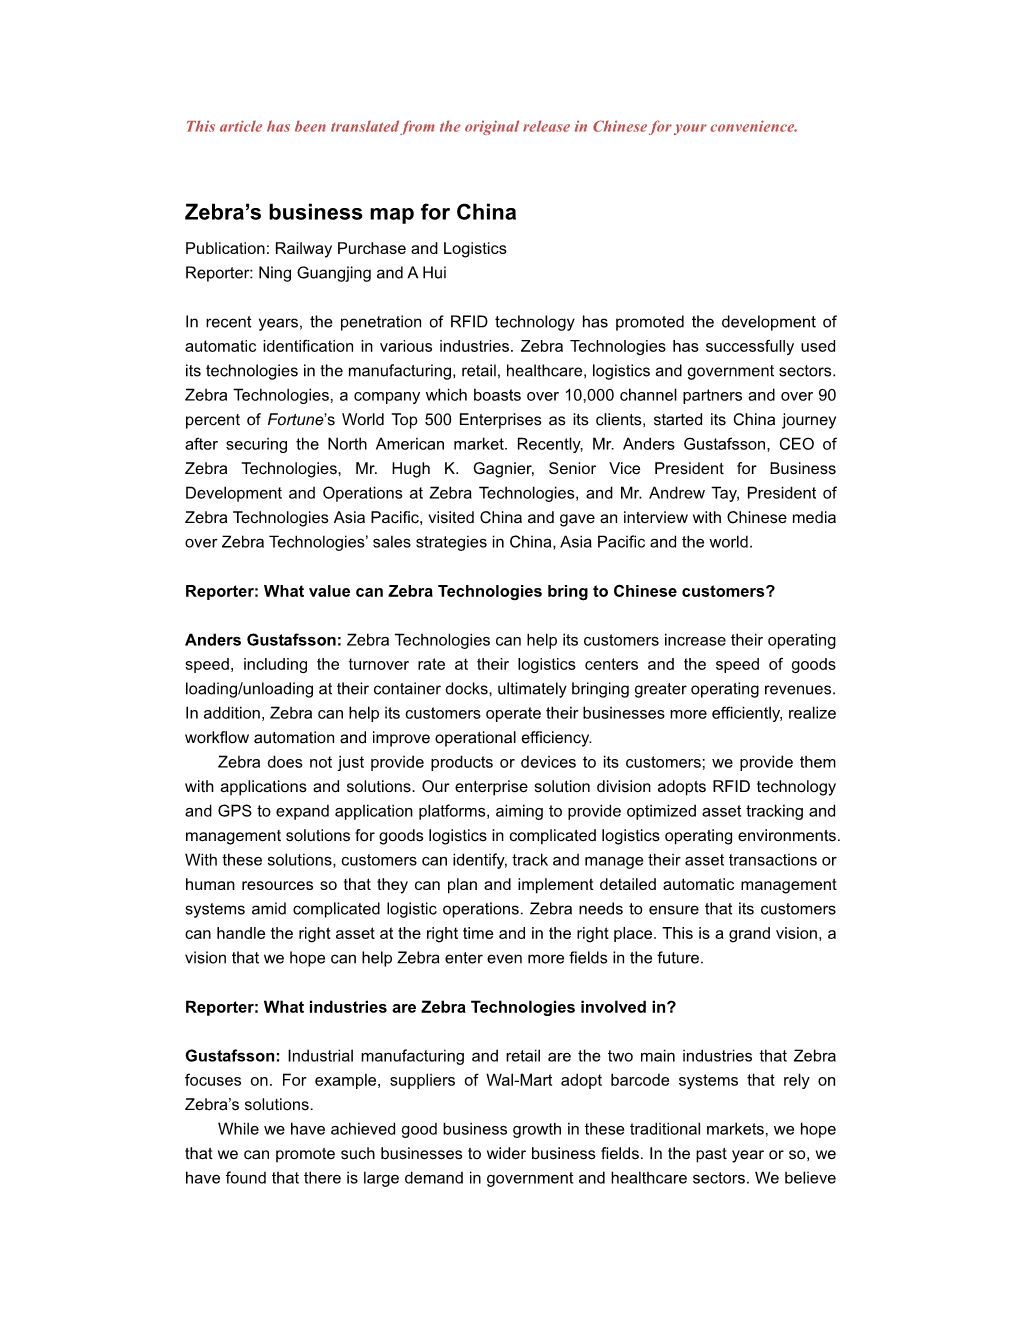 Zebra's Business Map for China